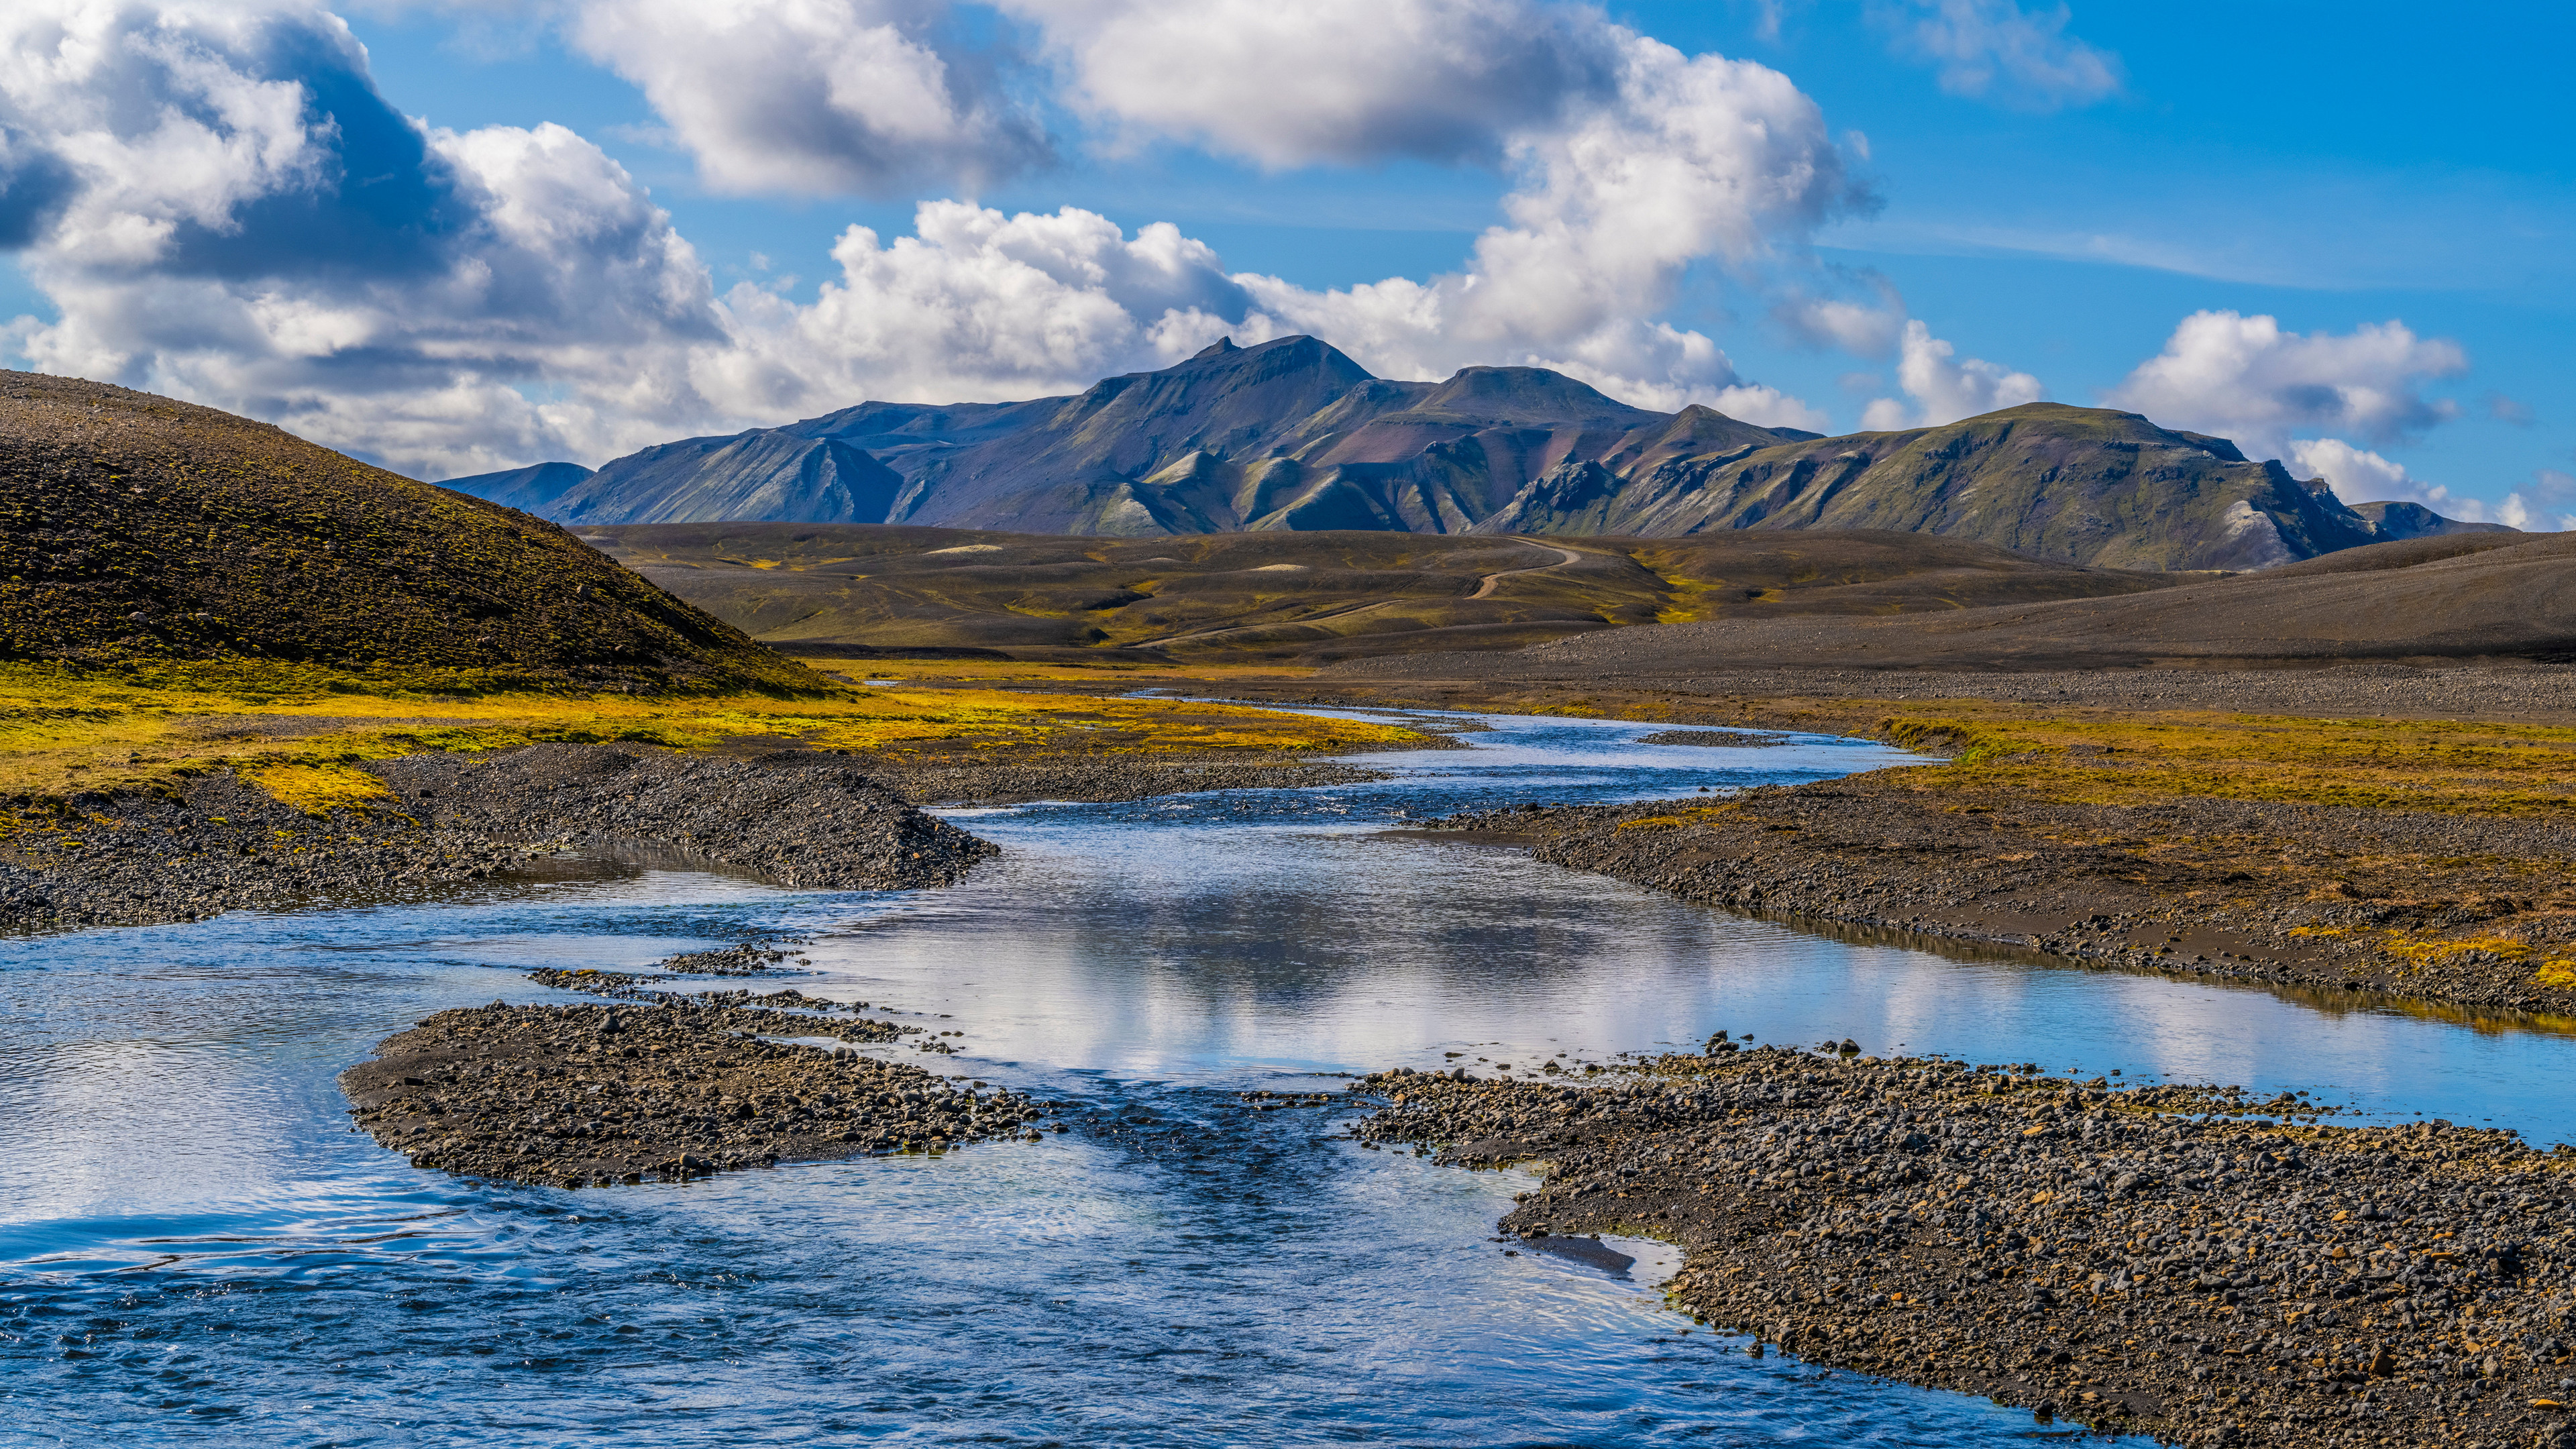 General 3840x2160 nature landscape river Iceland sky clouds water mountains reflection